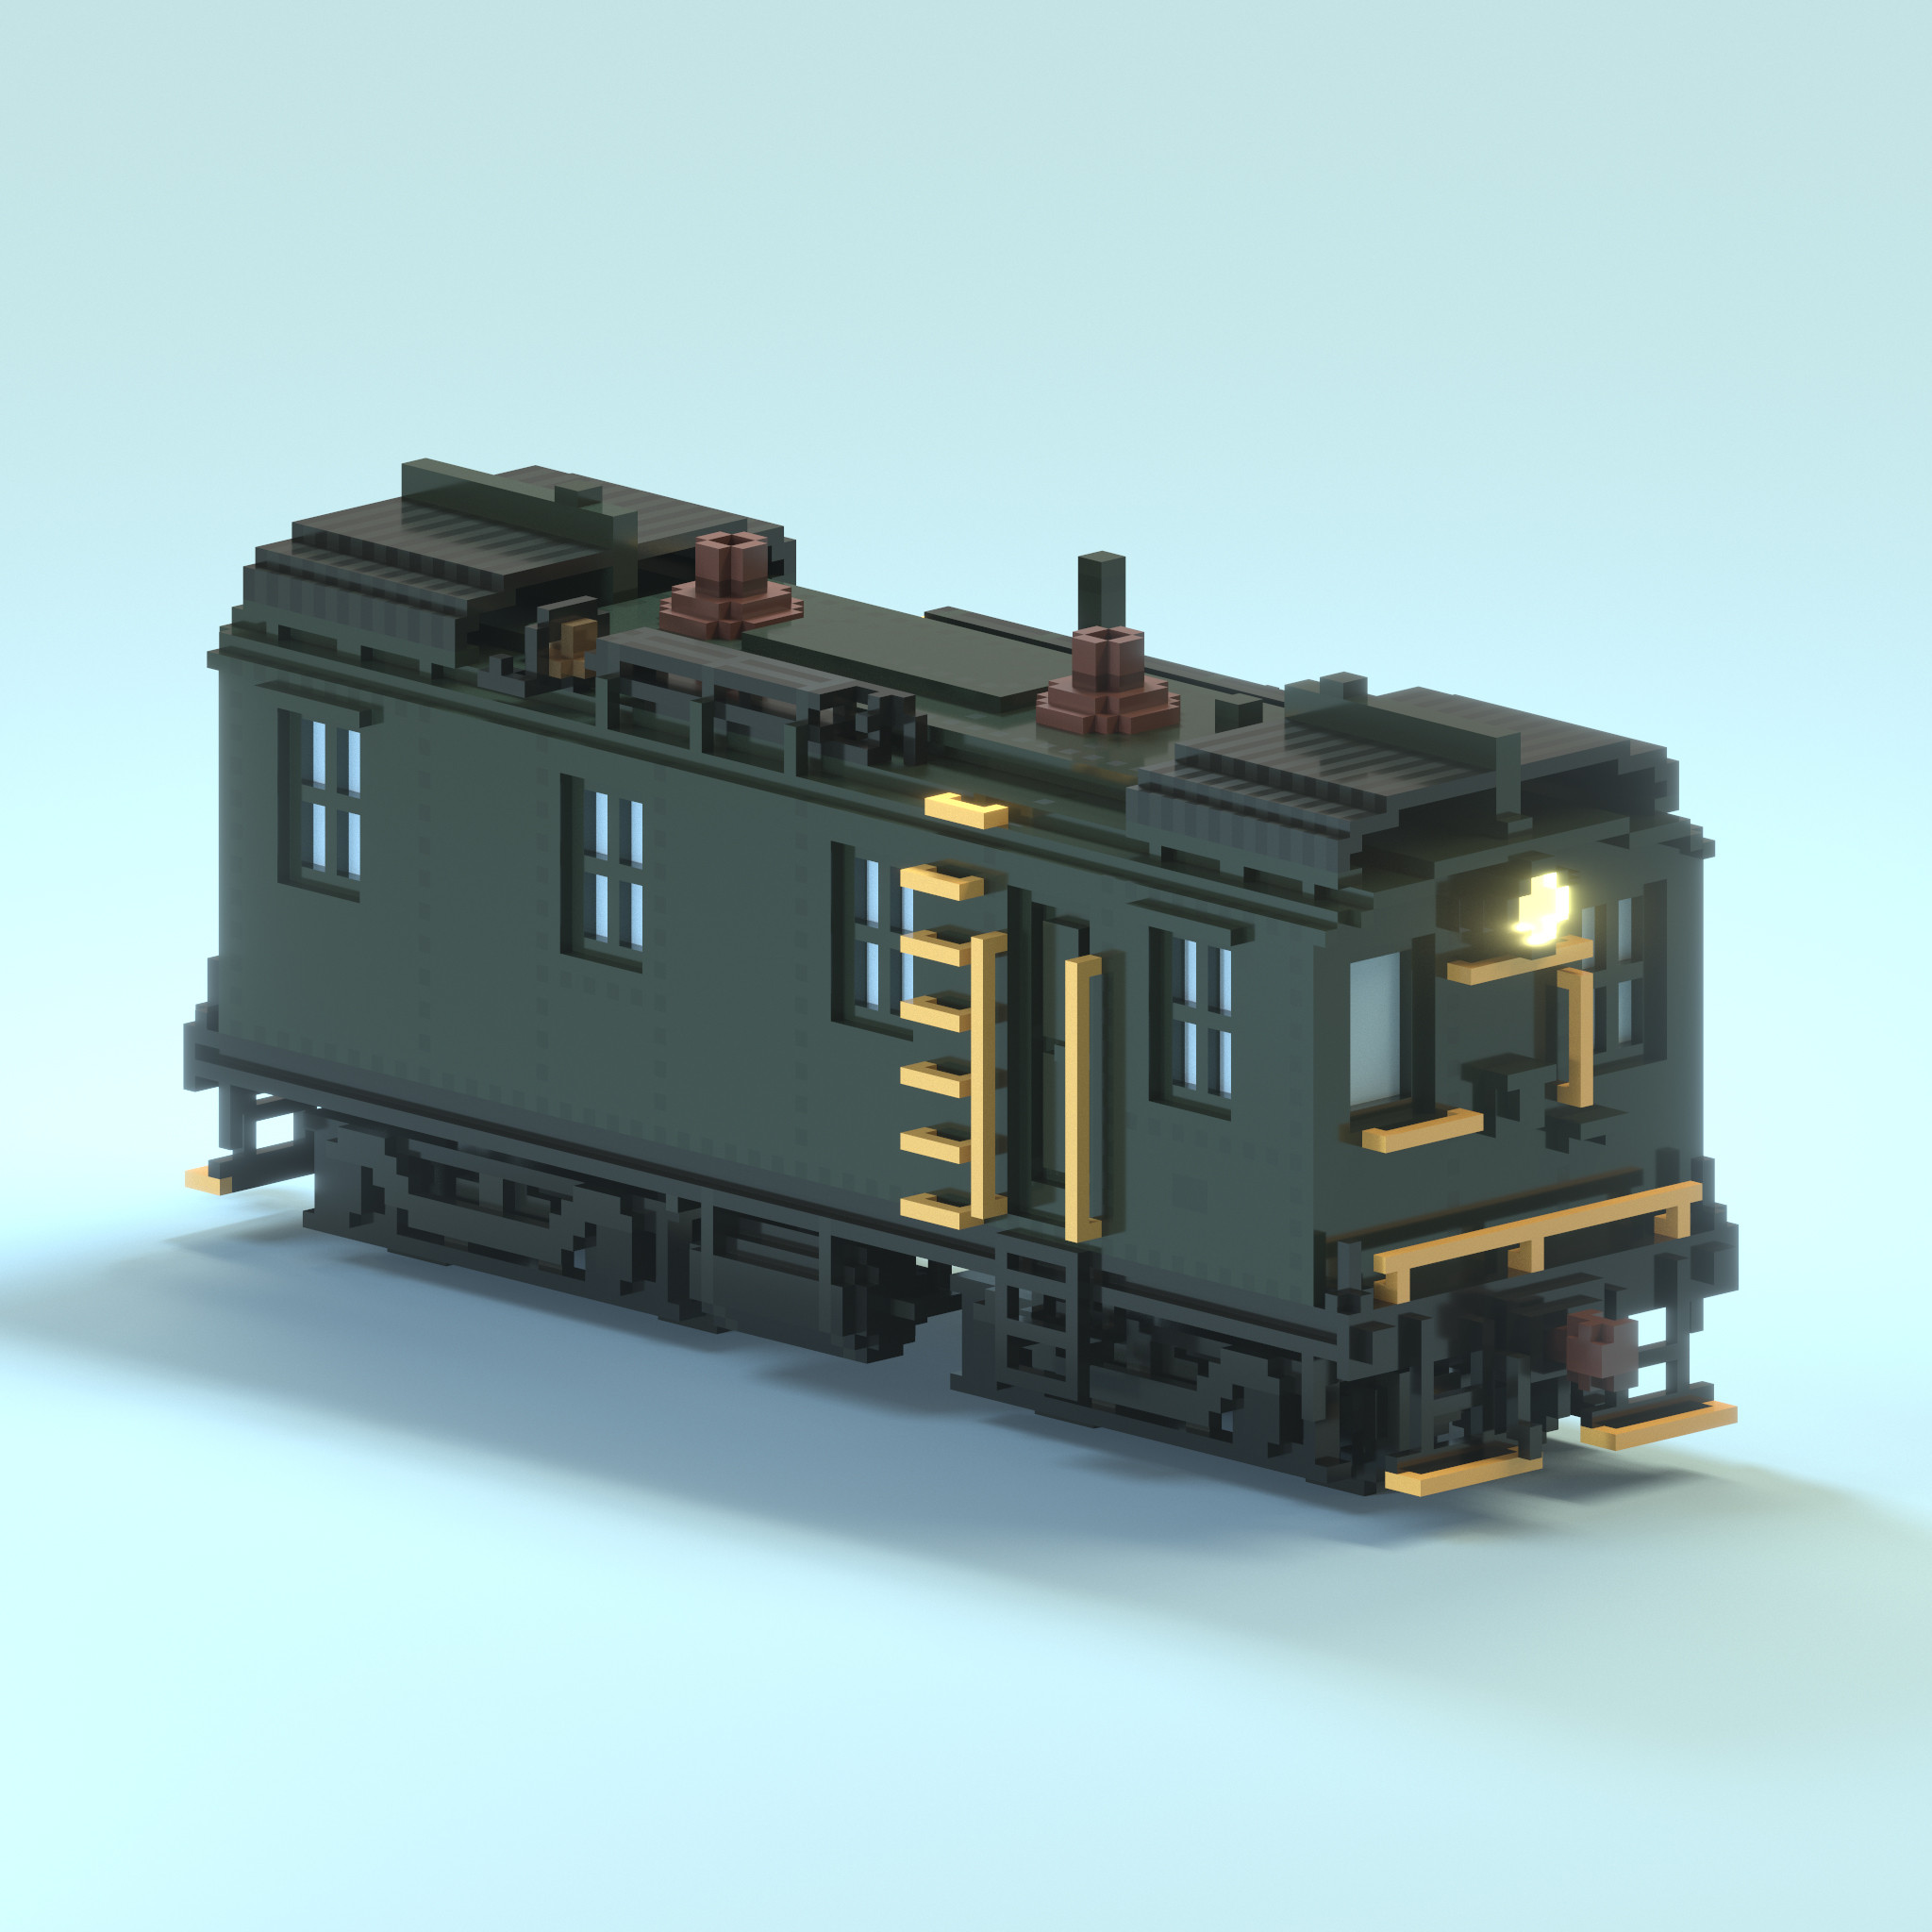 Bird's eye view of Central Railroad of New Jersey No. 1000 locomotive, modeled and rendered in Magicavoxel.